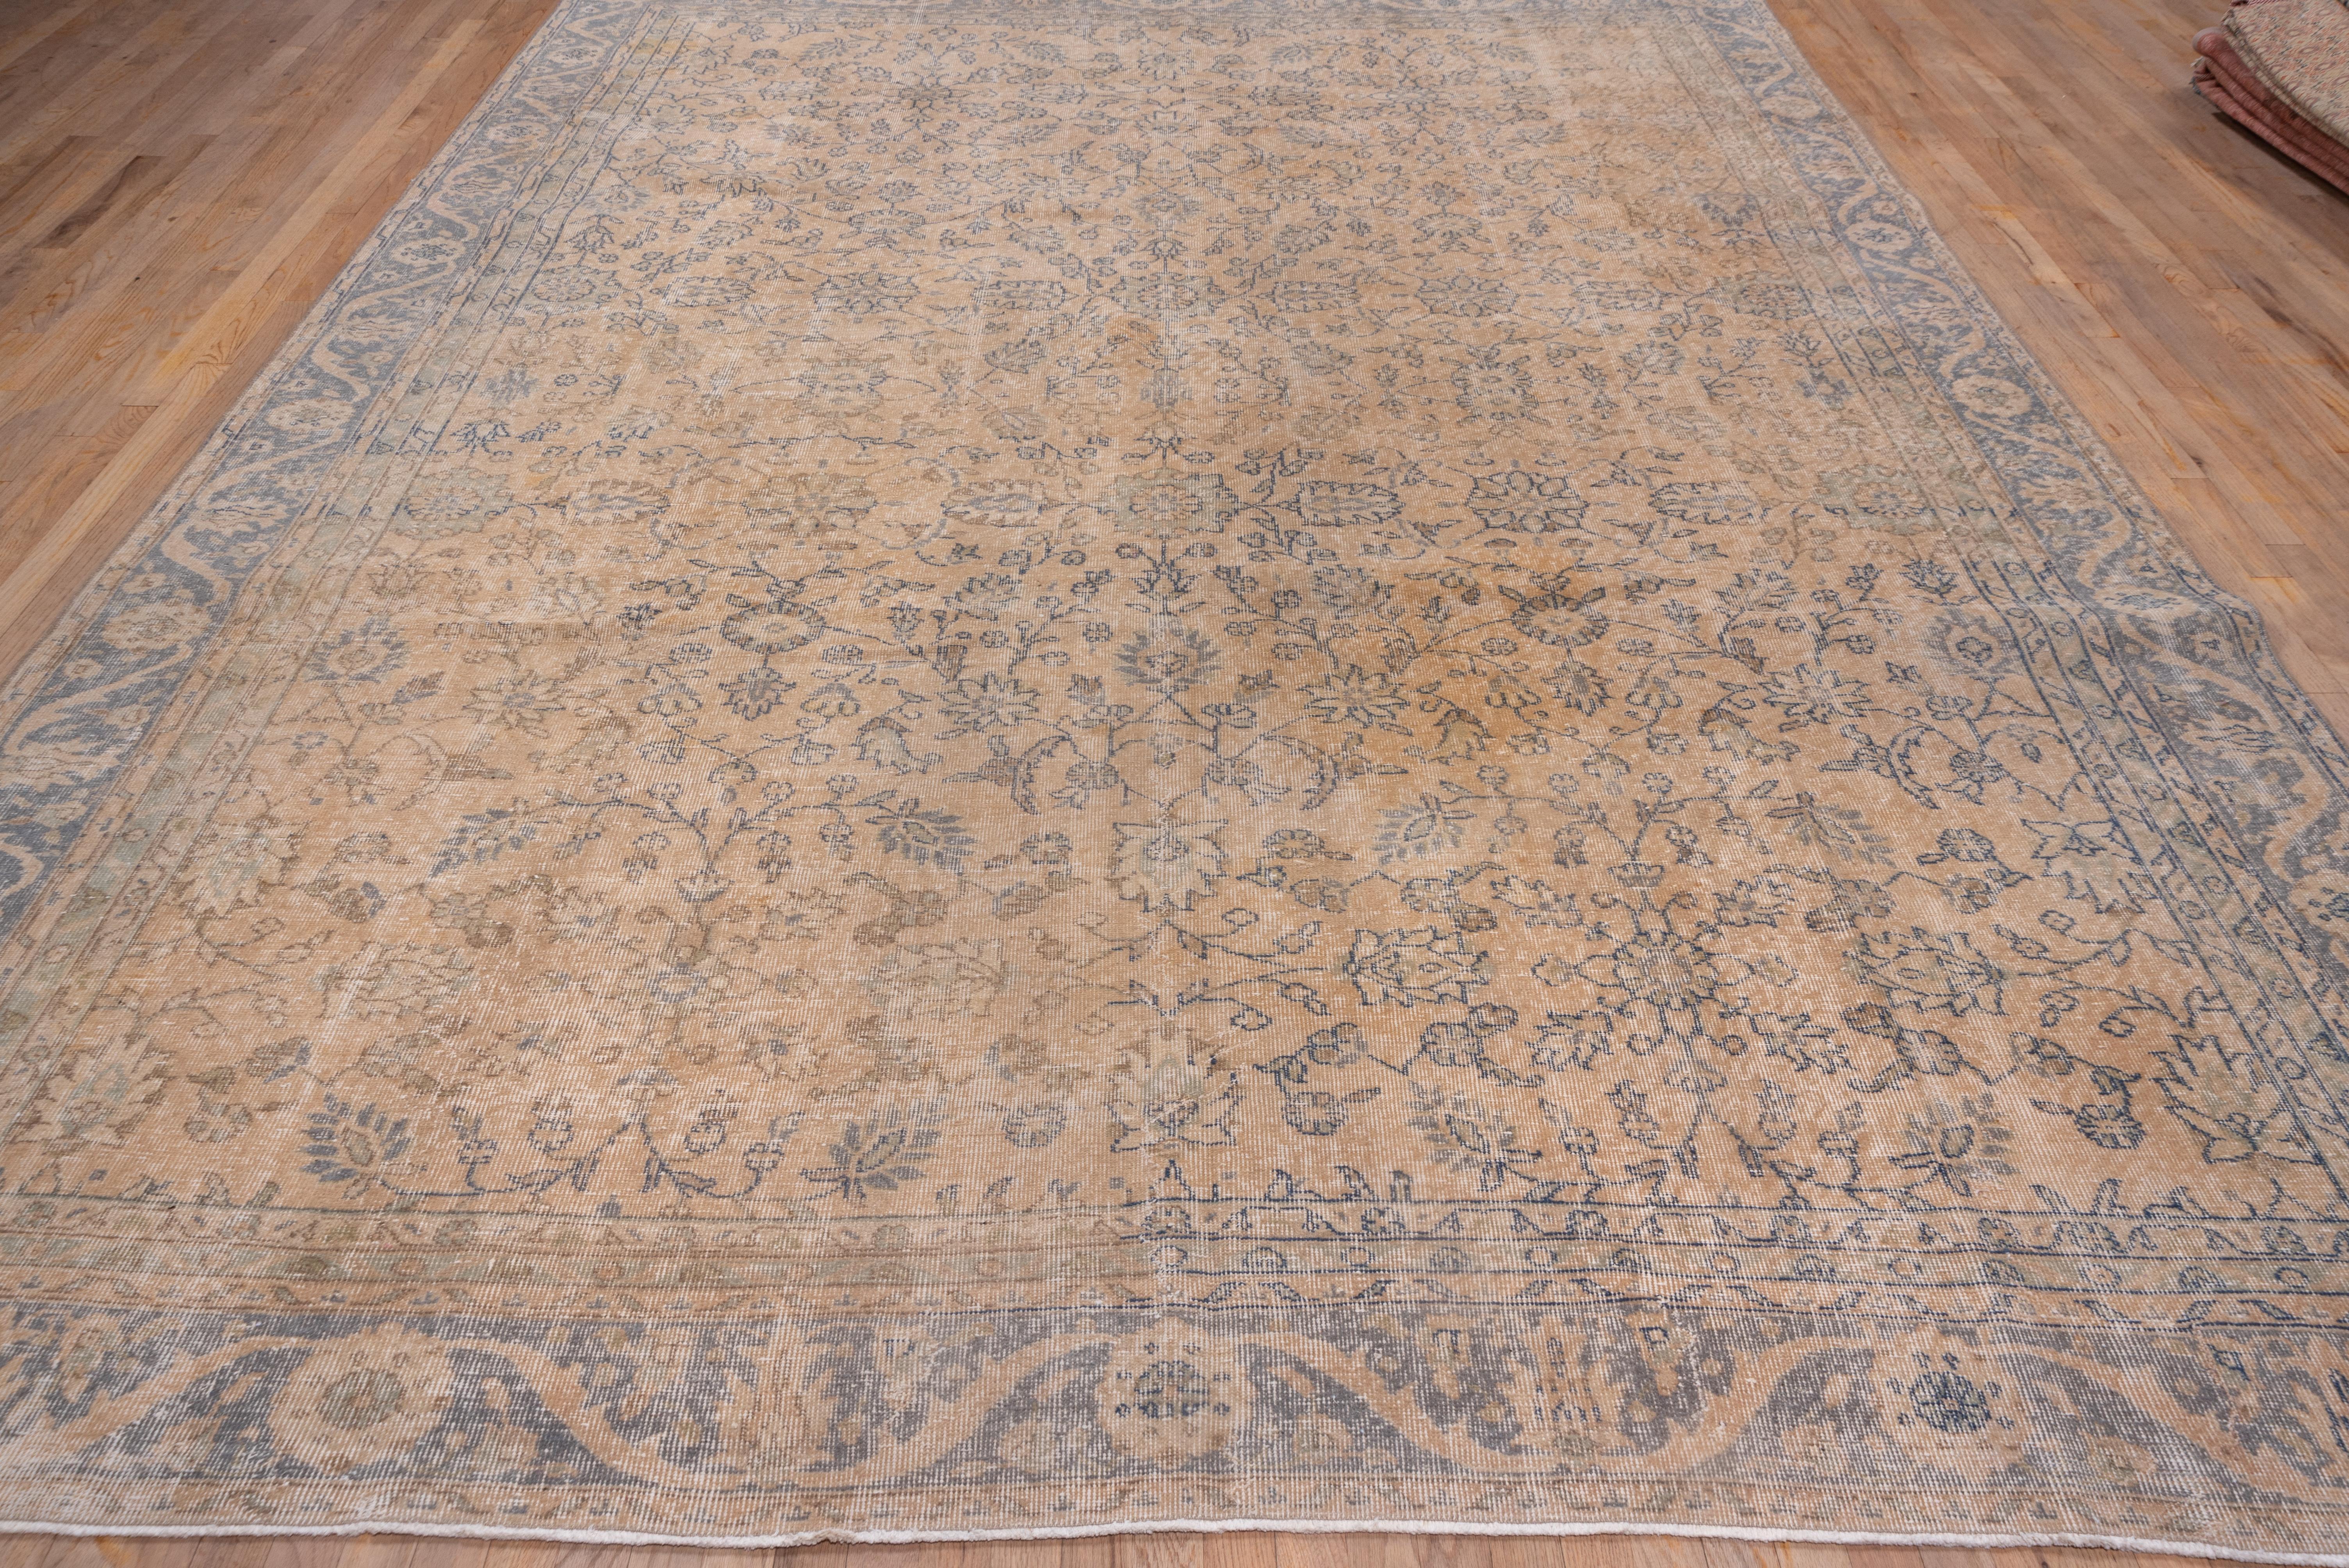 The buff field of this Turkish workshop carpet features an all-over pattern delineated in slate of rosettes, palmettes and flowering tendrils, some forming open motives. At the centre is a larger rosette sprouting palmettes. The teal grey border